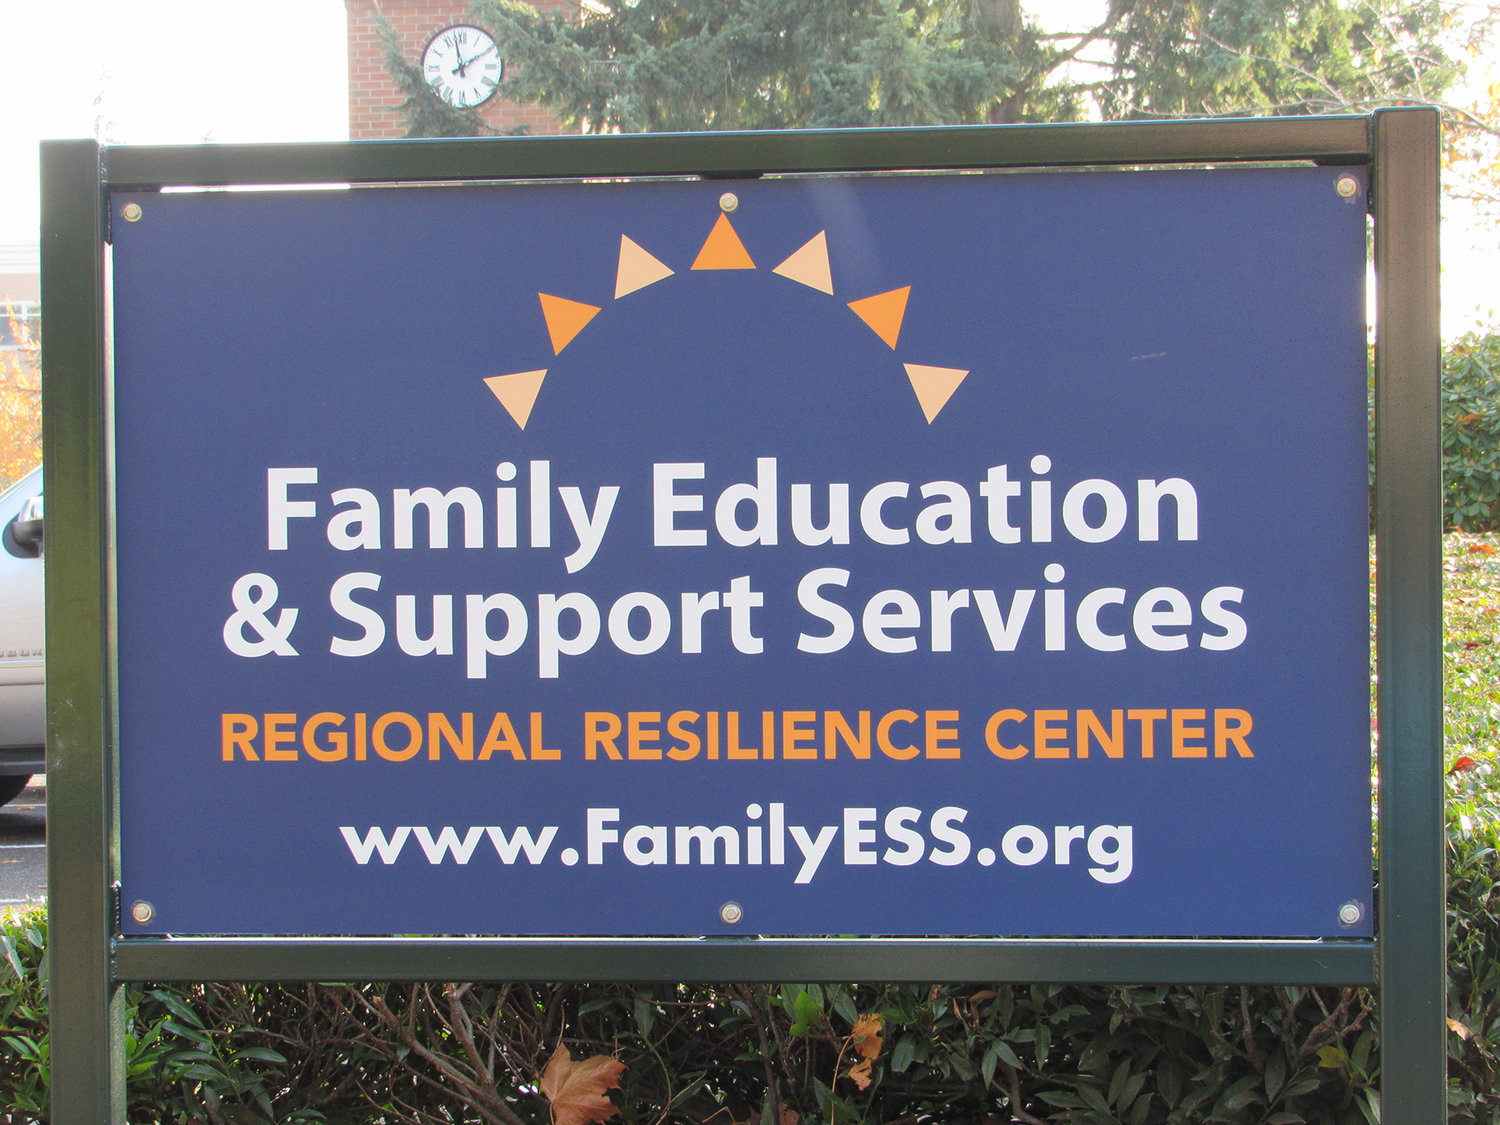 The Tumwater-based Family Education &amp; Support Services also offers its services to Lewis County residents.